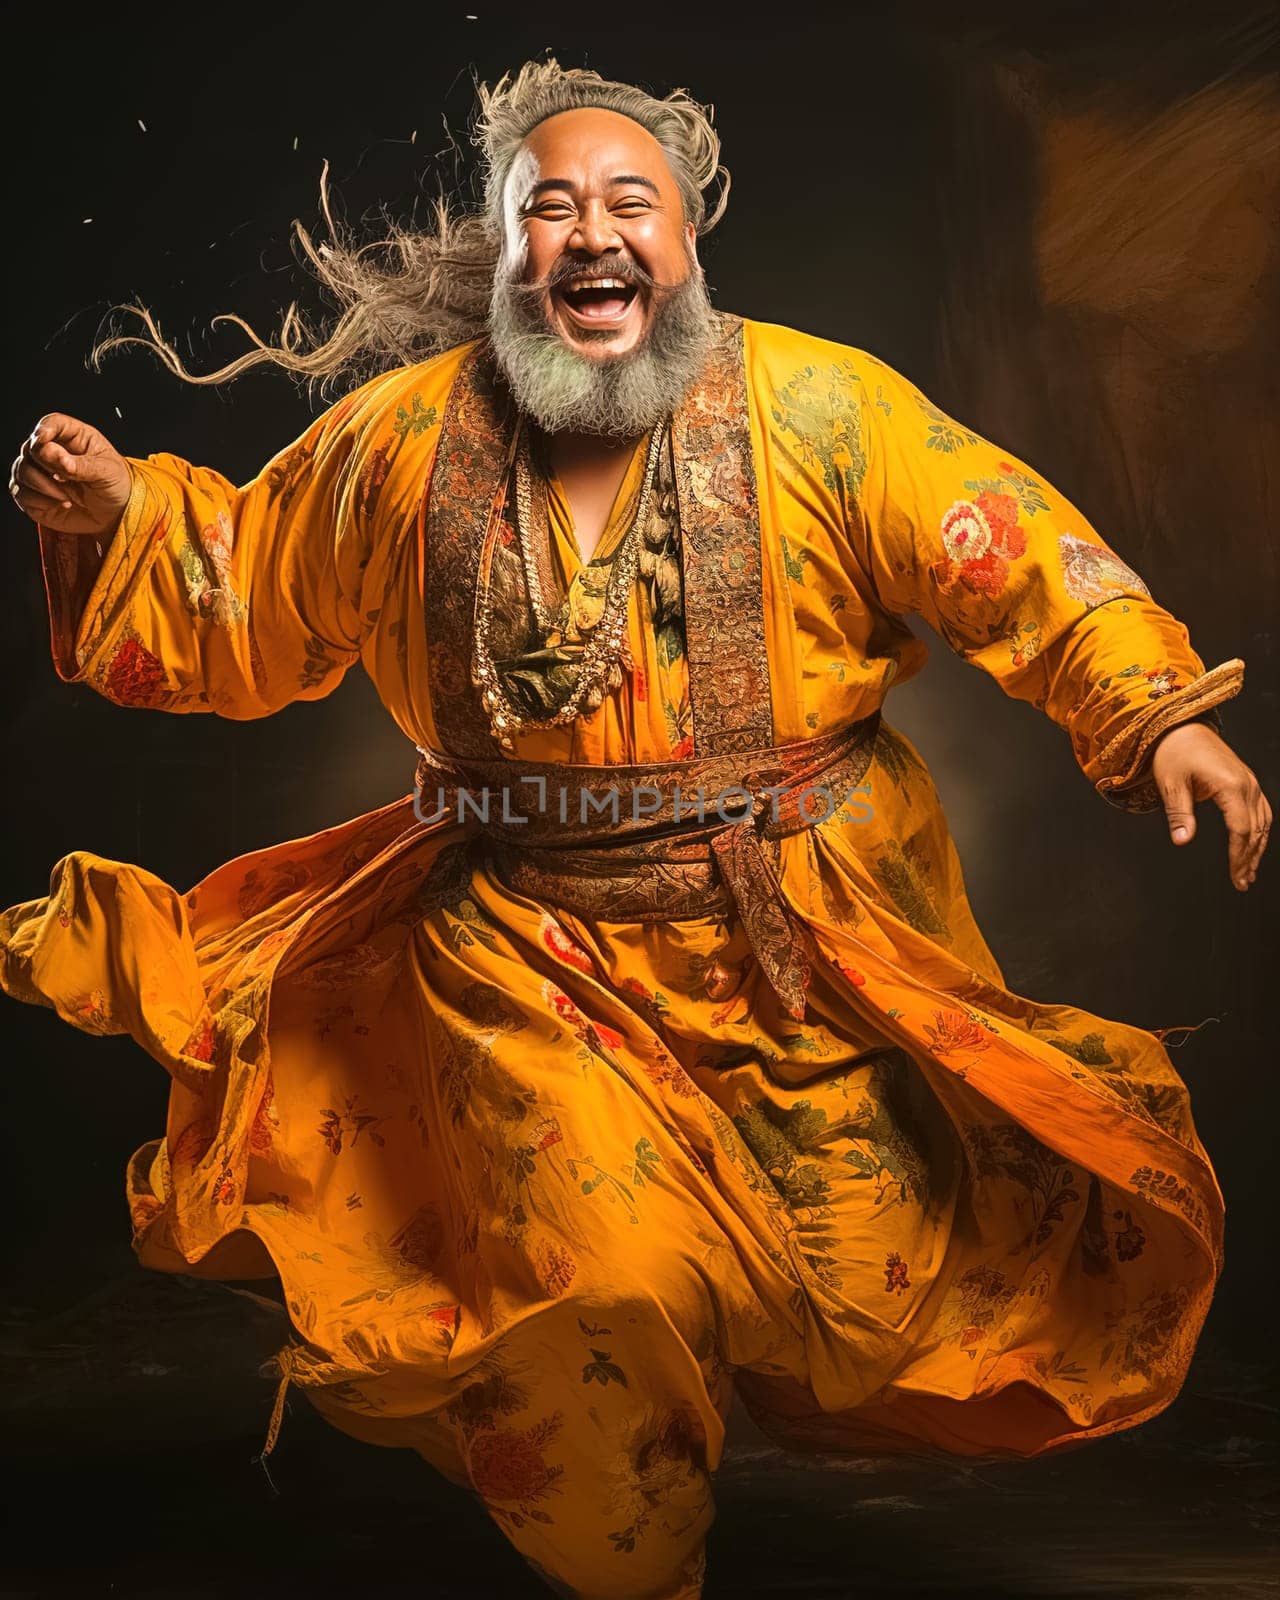 A happy man with a beard dances in an Indian costume. by Yurich32